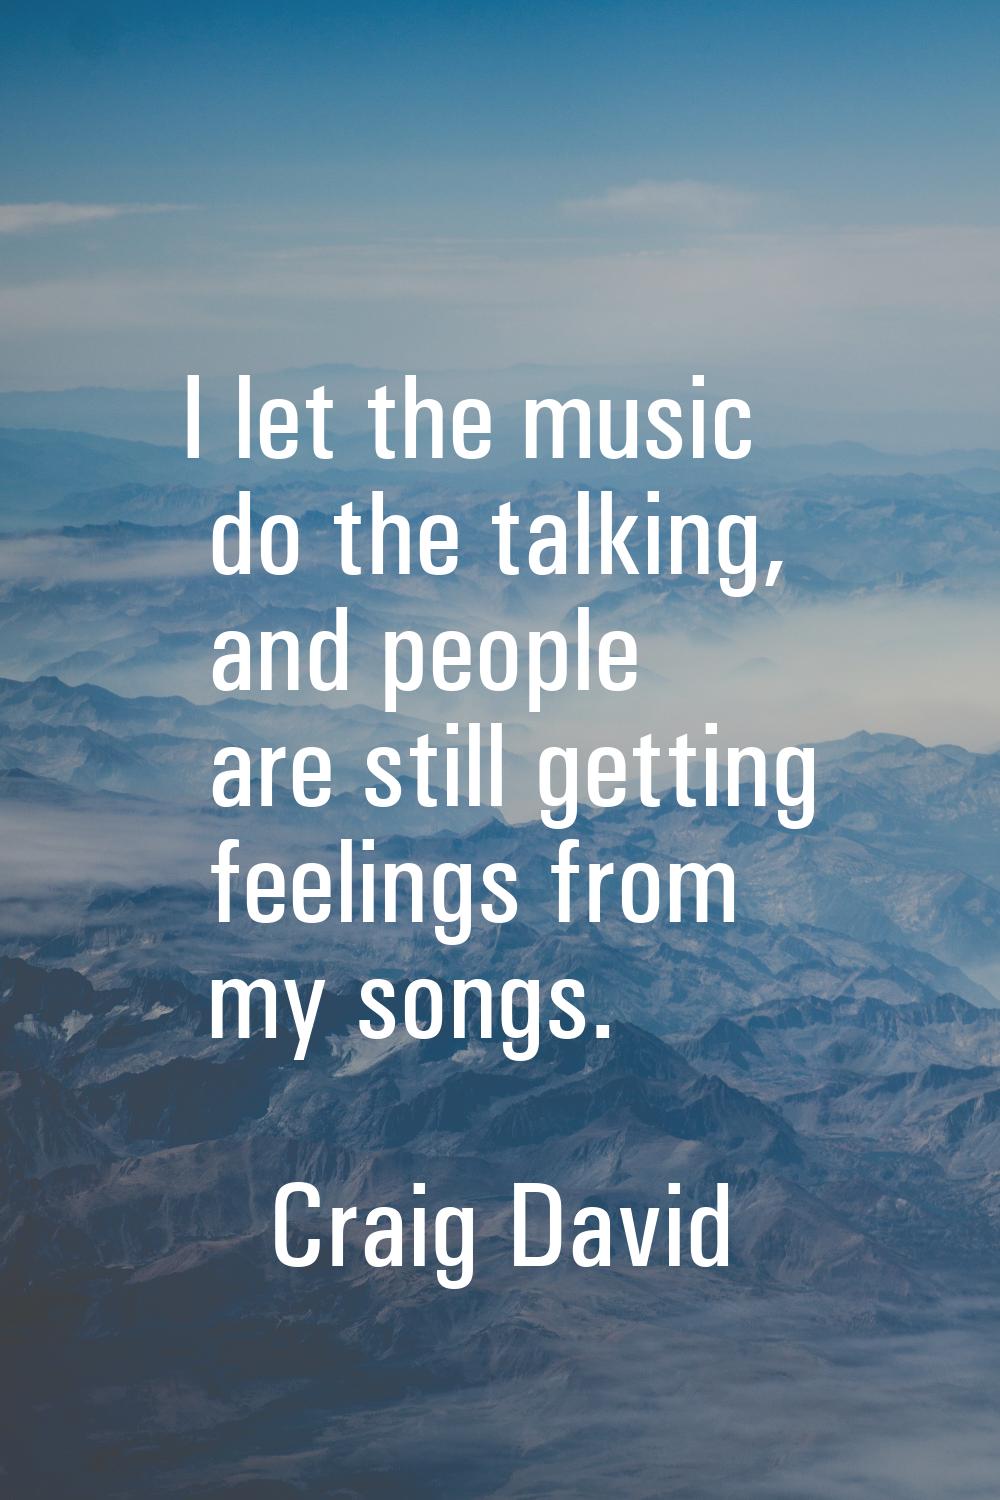 I let the music do the talking, and people are still getting feelings from my songs.